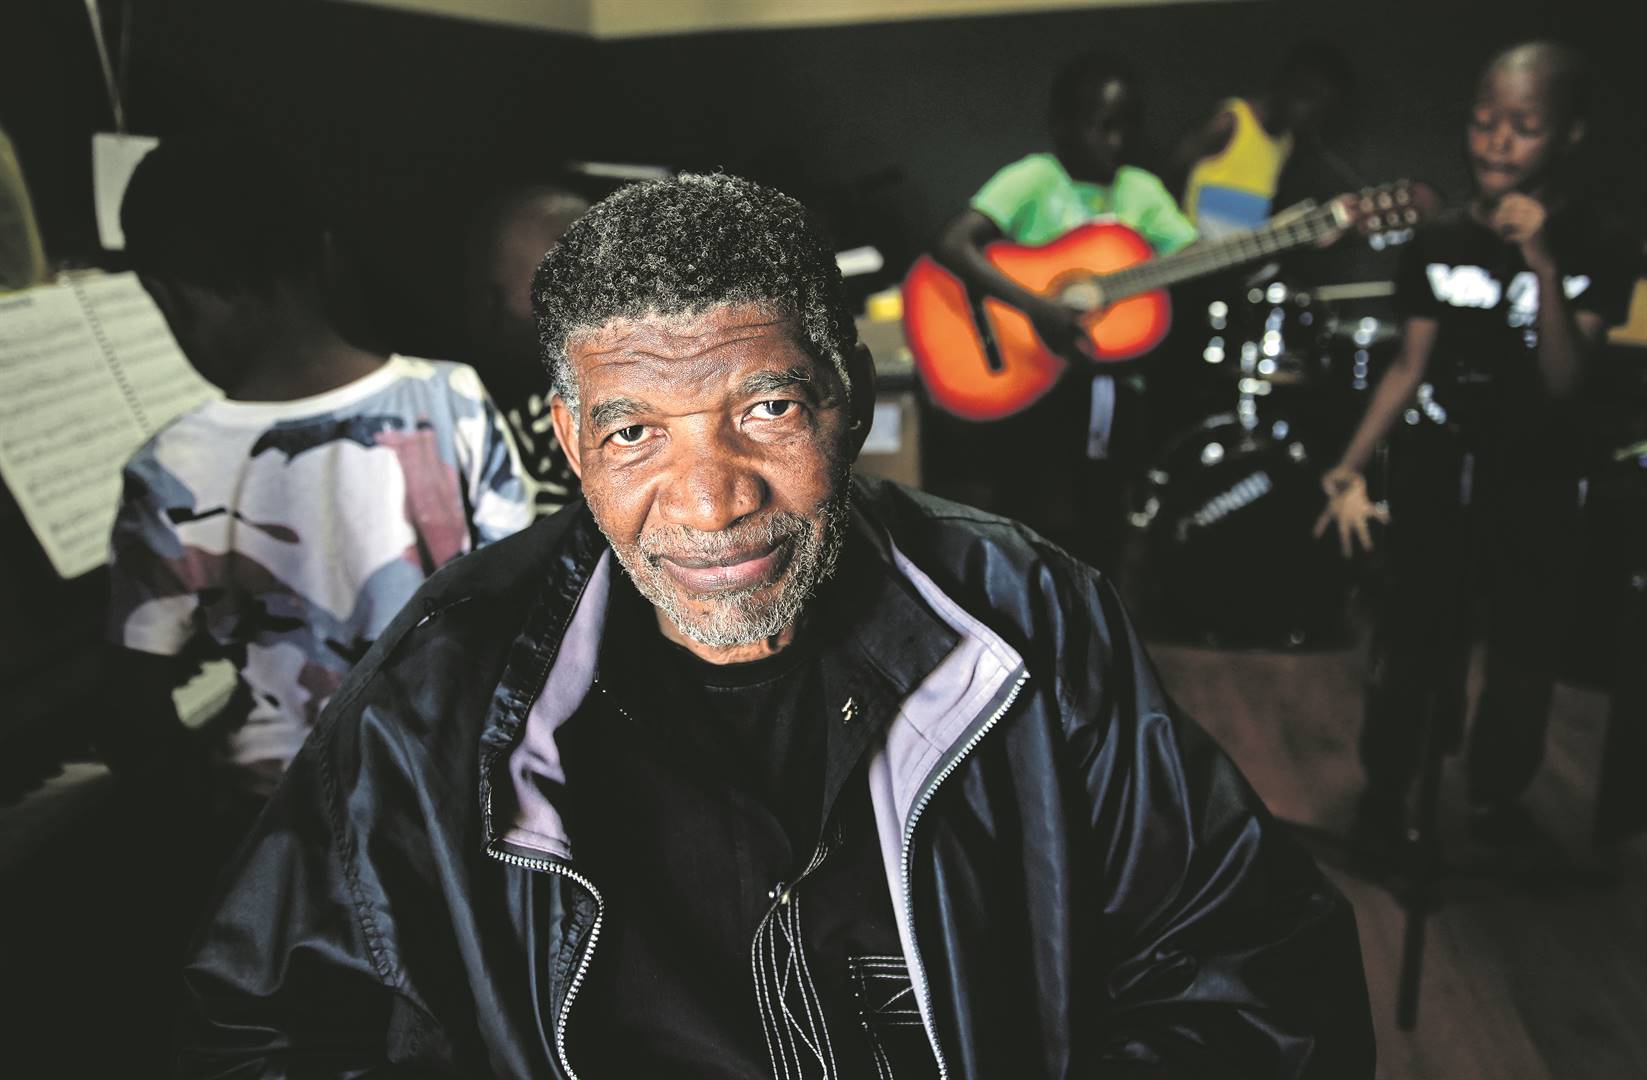 Jerry ‘Bra Monk’ Molelekwa, the father of late jazz pianist, composer and producer Moses Molelekwa, runs an art centre in Thembisa in Ekurhuleni. Established to preserve his son’s legacy, the centre nurtures talented young musicians.